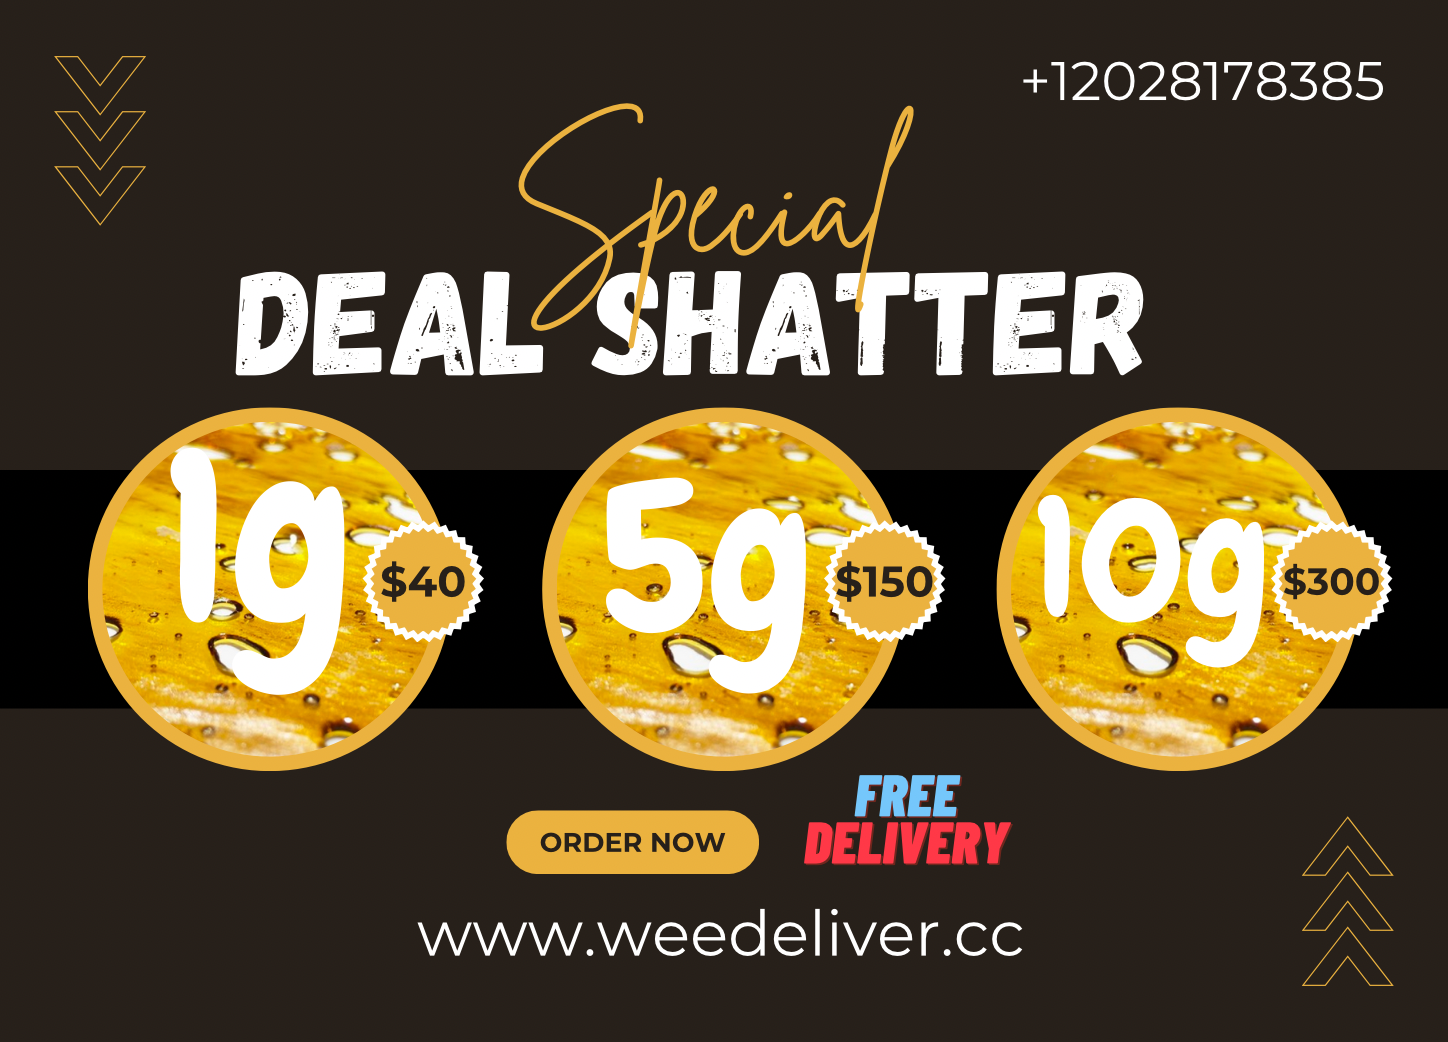 Shatter Special Deal 1g $40, 5g $150 and 10g for $300